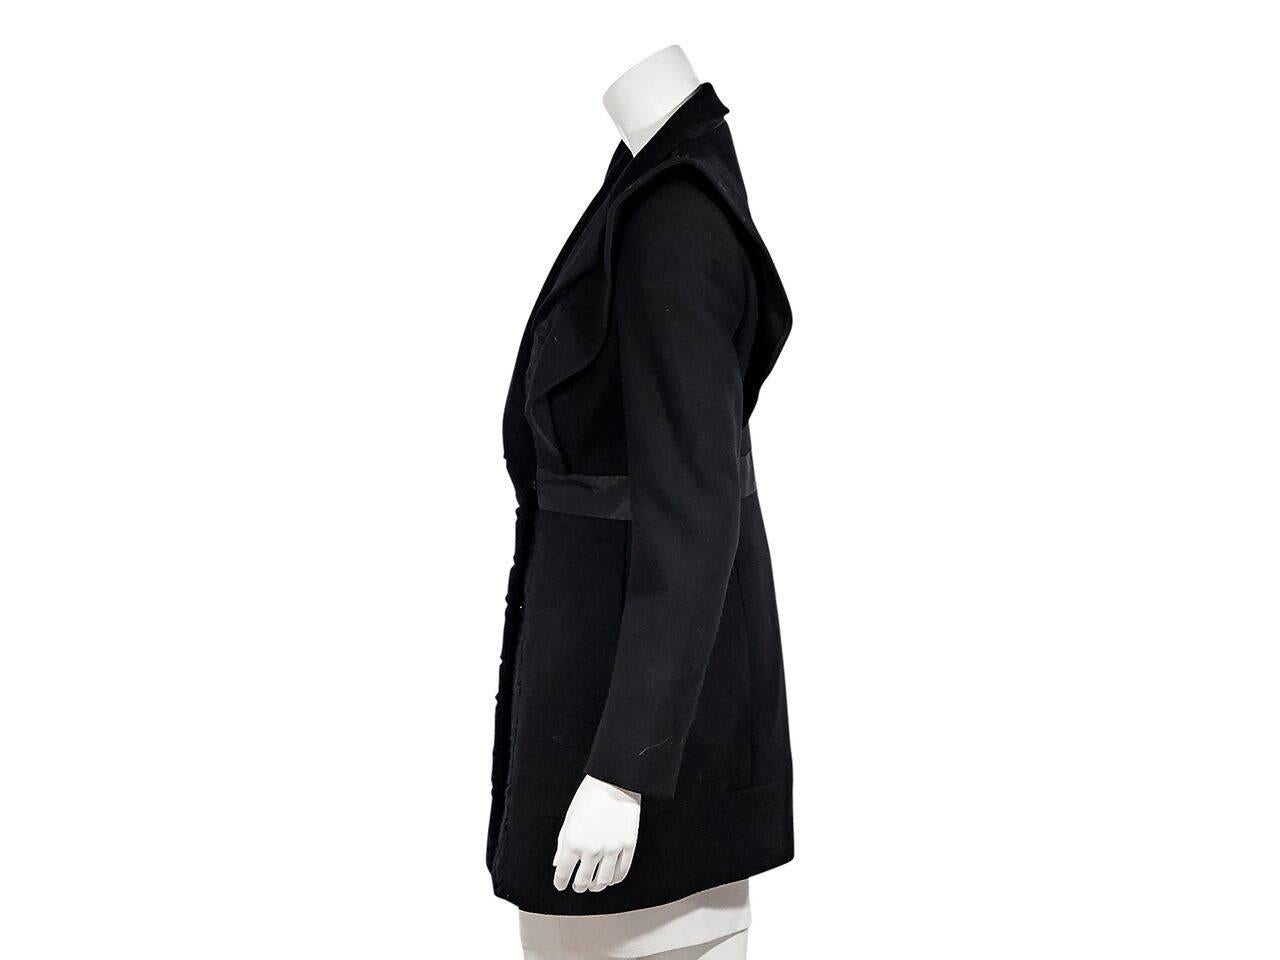 Product details:  Black virgin wool coat by Prada.  Long sleeves.  Banded waist.  Concealed closure.  Front lace panel.  
Condition: Pre-owned. Very good.
Est. Retail $ 2,995.00